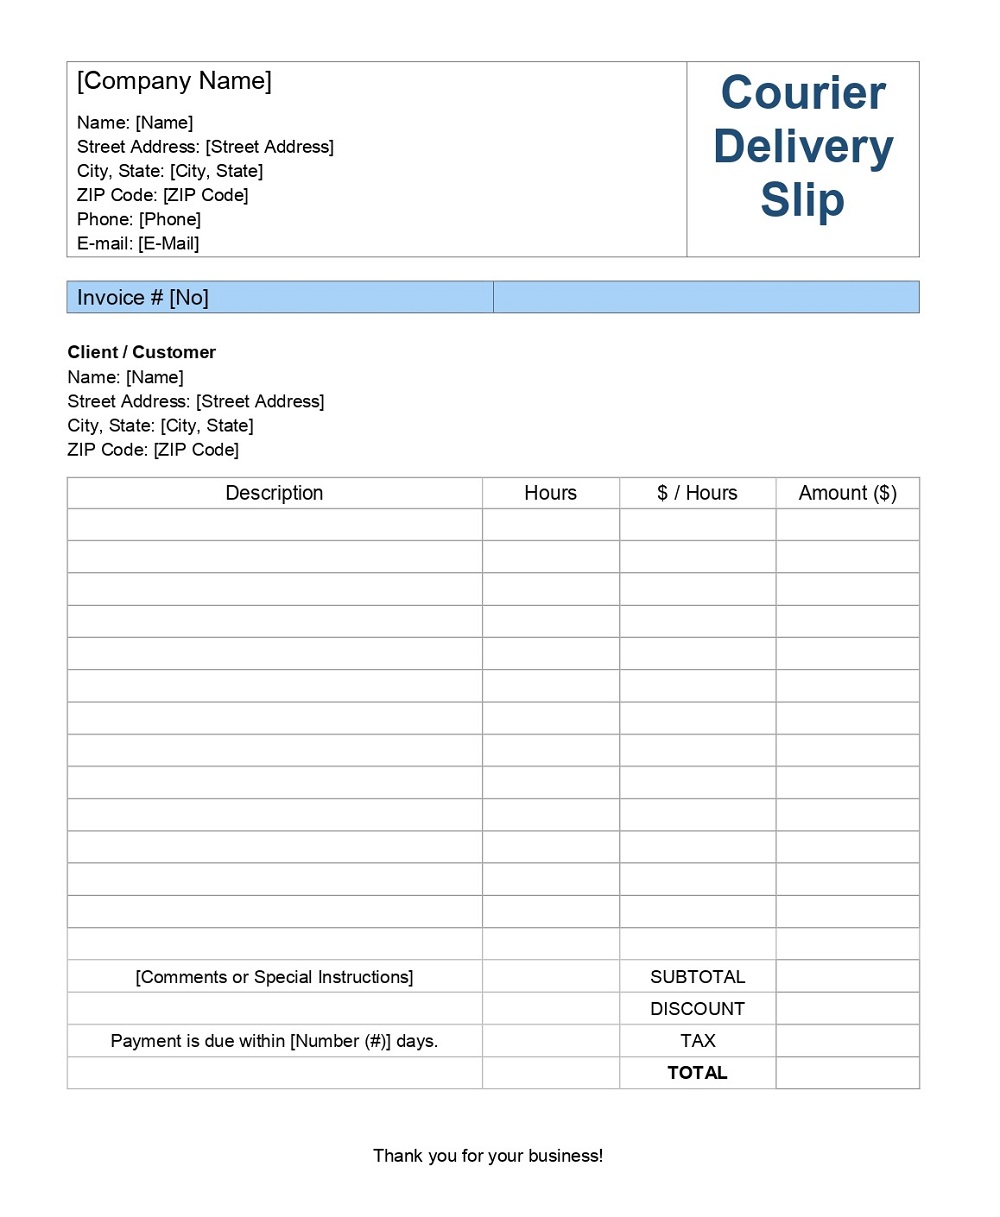 Courier Delivery Slip